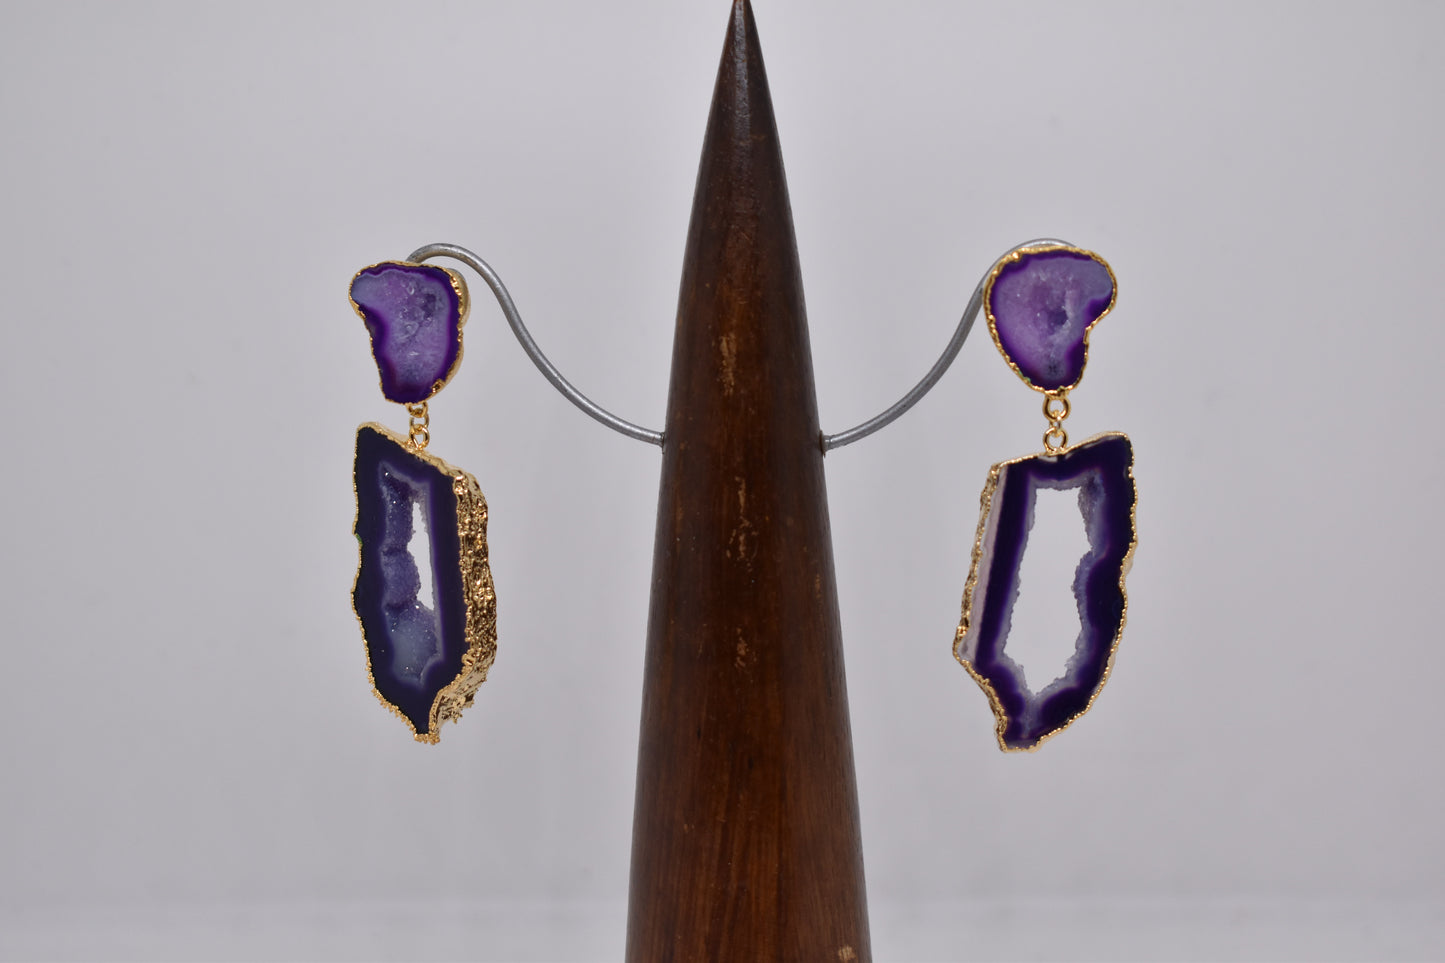 Geode Agate with Agate Slice Earrings available in a variety of fabulous colours - Violet Elizabeth